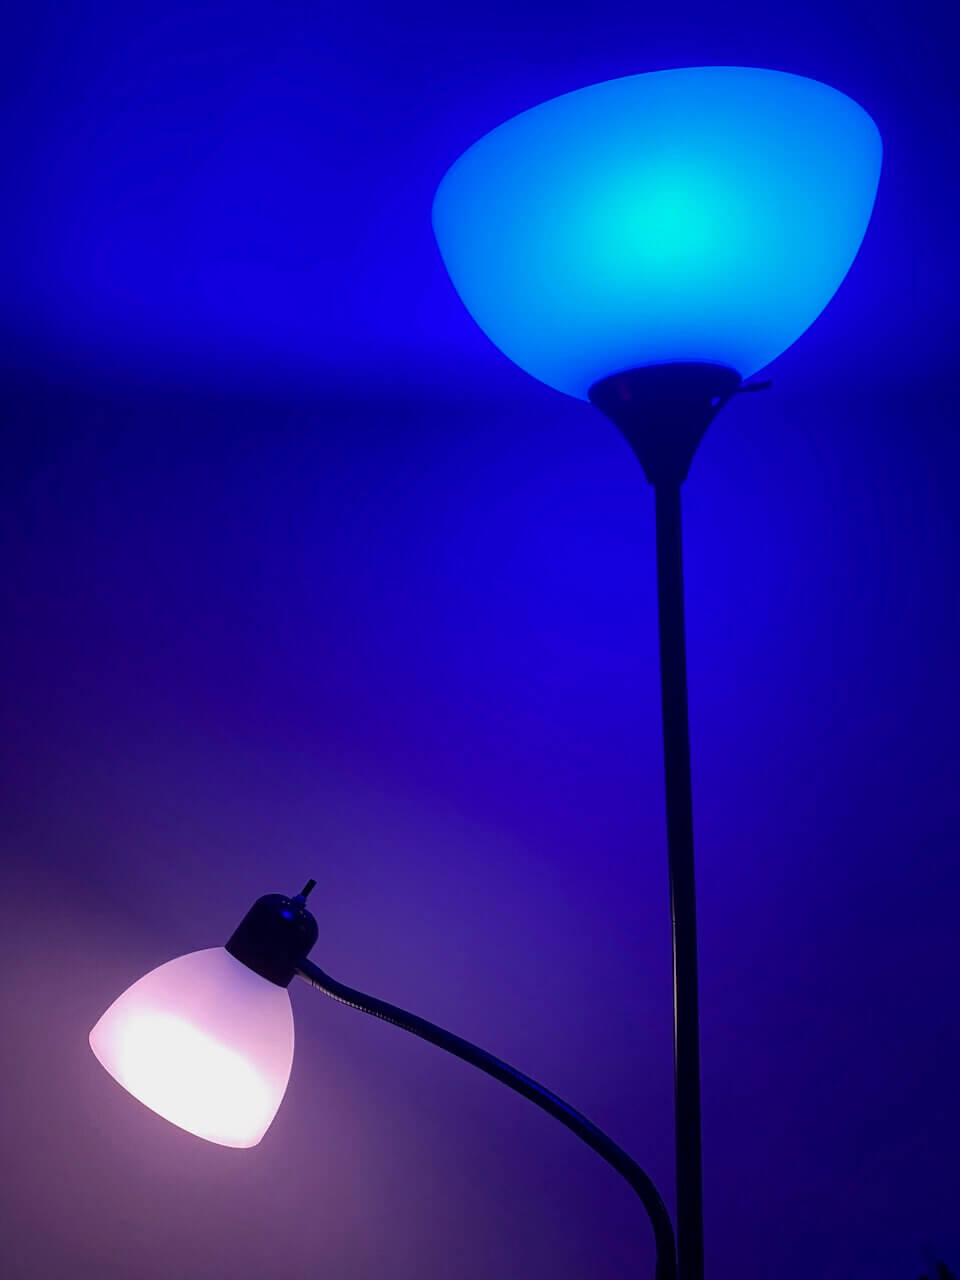 Philips Hue smart light bulbs showing their color-changing ability